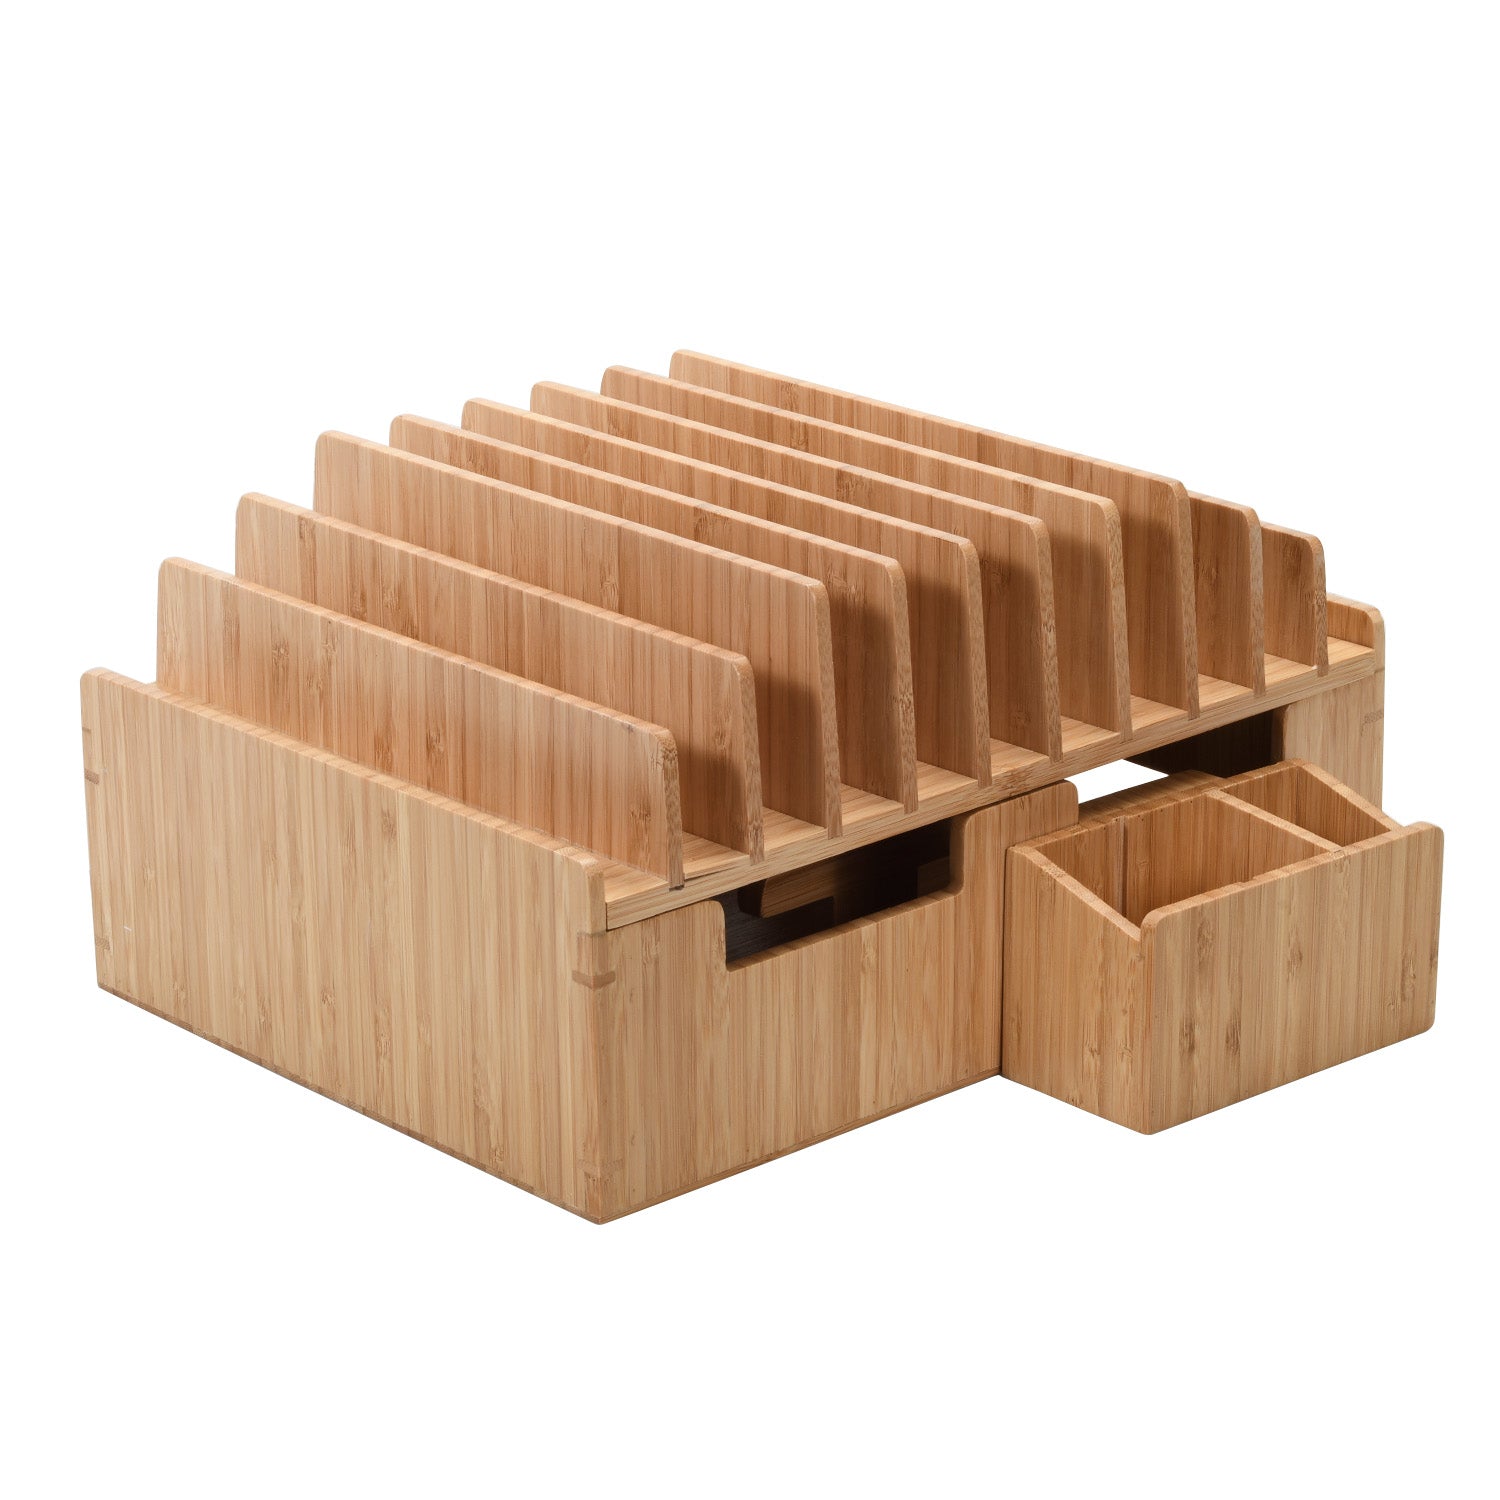 Bamboo Caddy Add-On for Charging Stations and Office Organizers